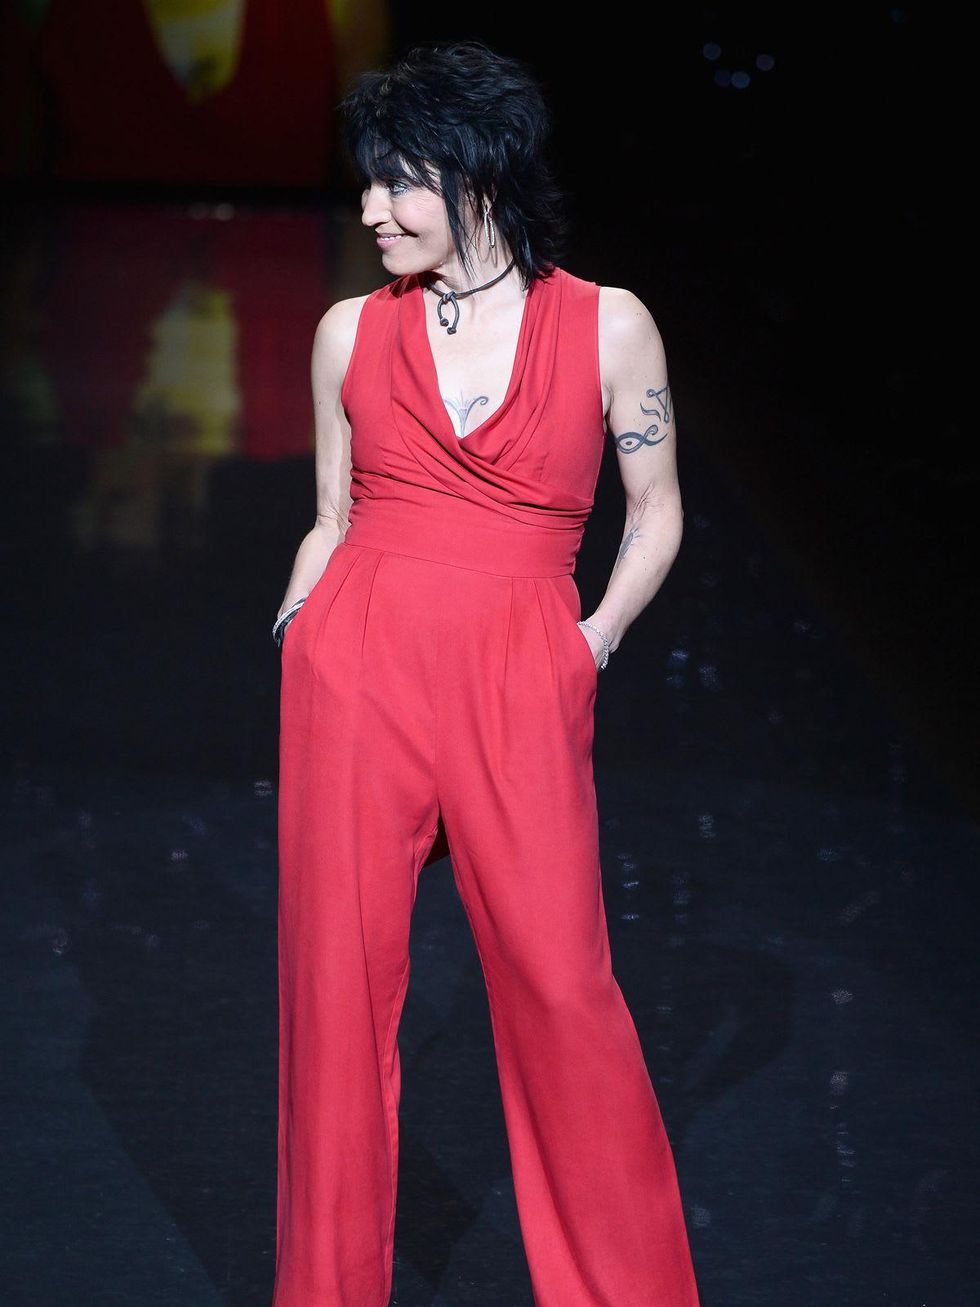 Joan Jett walks the runway wearing Catherine Malandrino at Go Red For Women - The Heart Truth Red Dress Collection 2014 Show February 2014